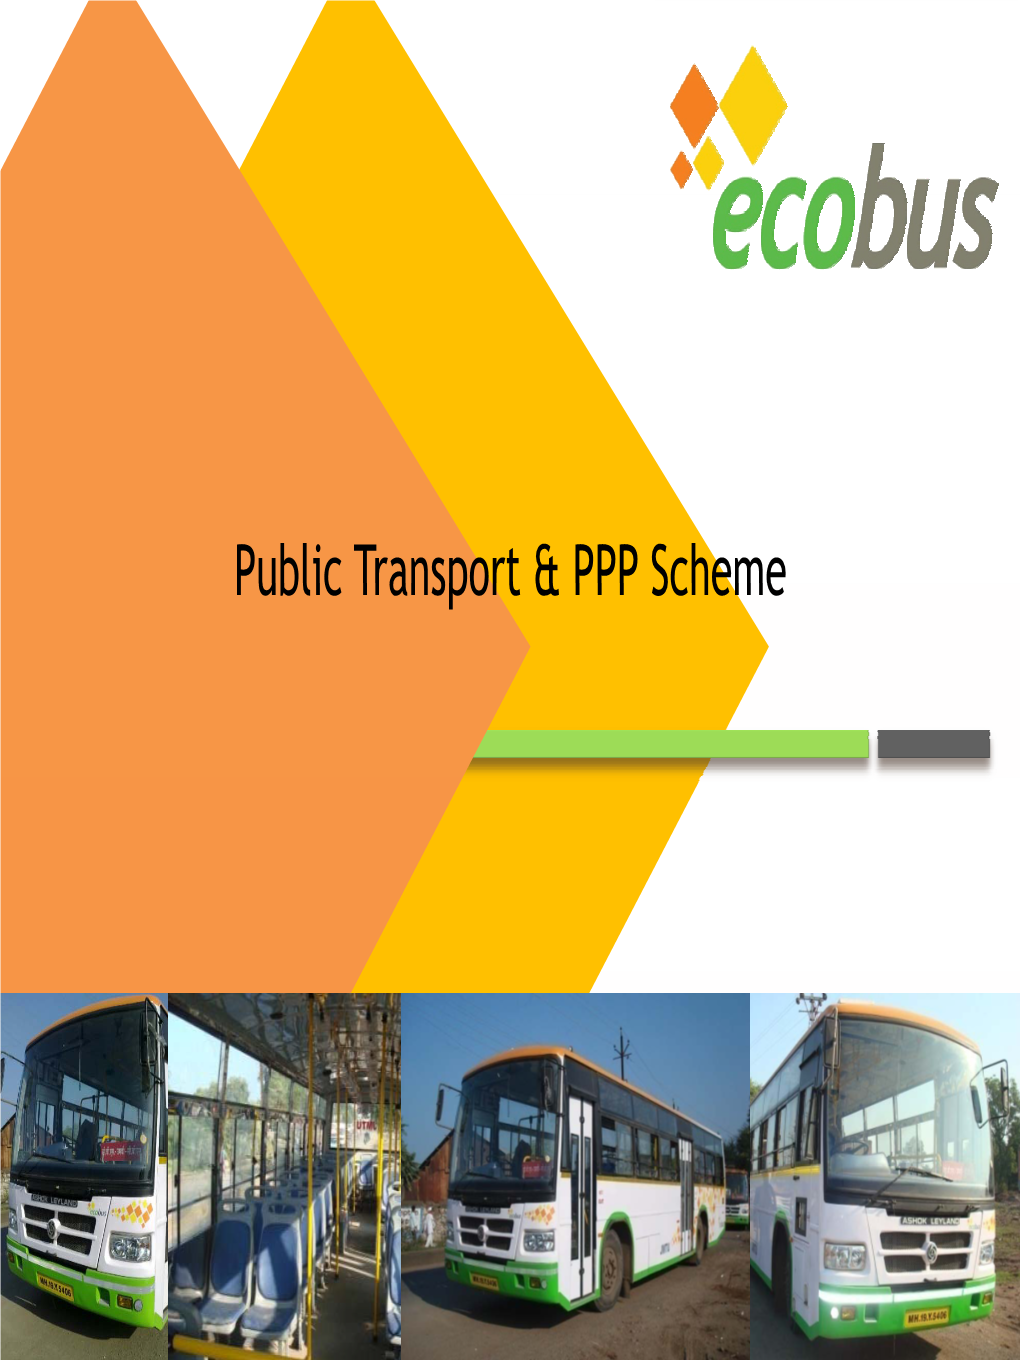 State of the Art Buses and Bus Stops : the State-Of-The-Art Bus Stops & Terminal Will Provide Ample Space for Advertising